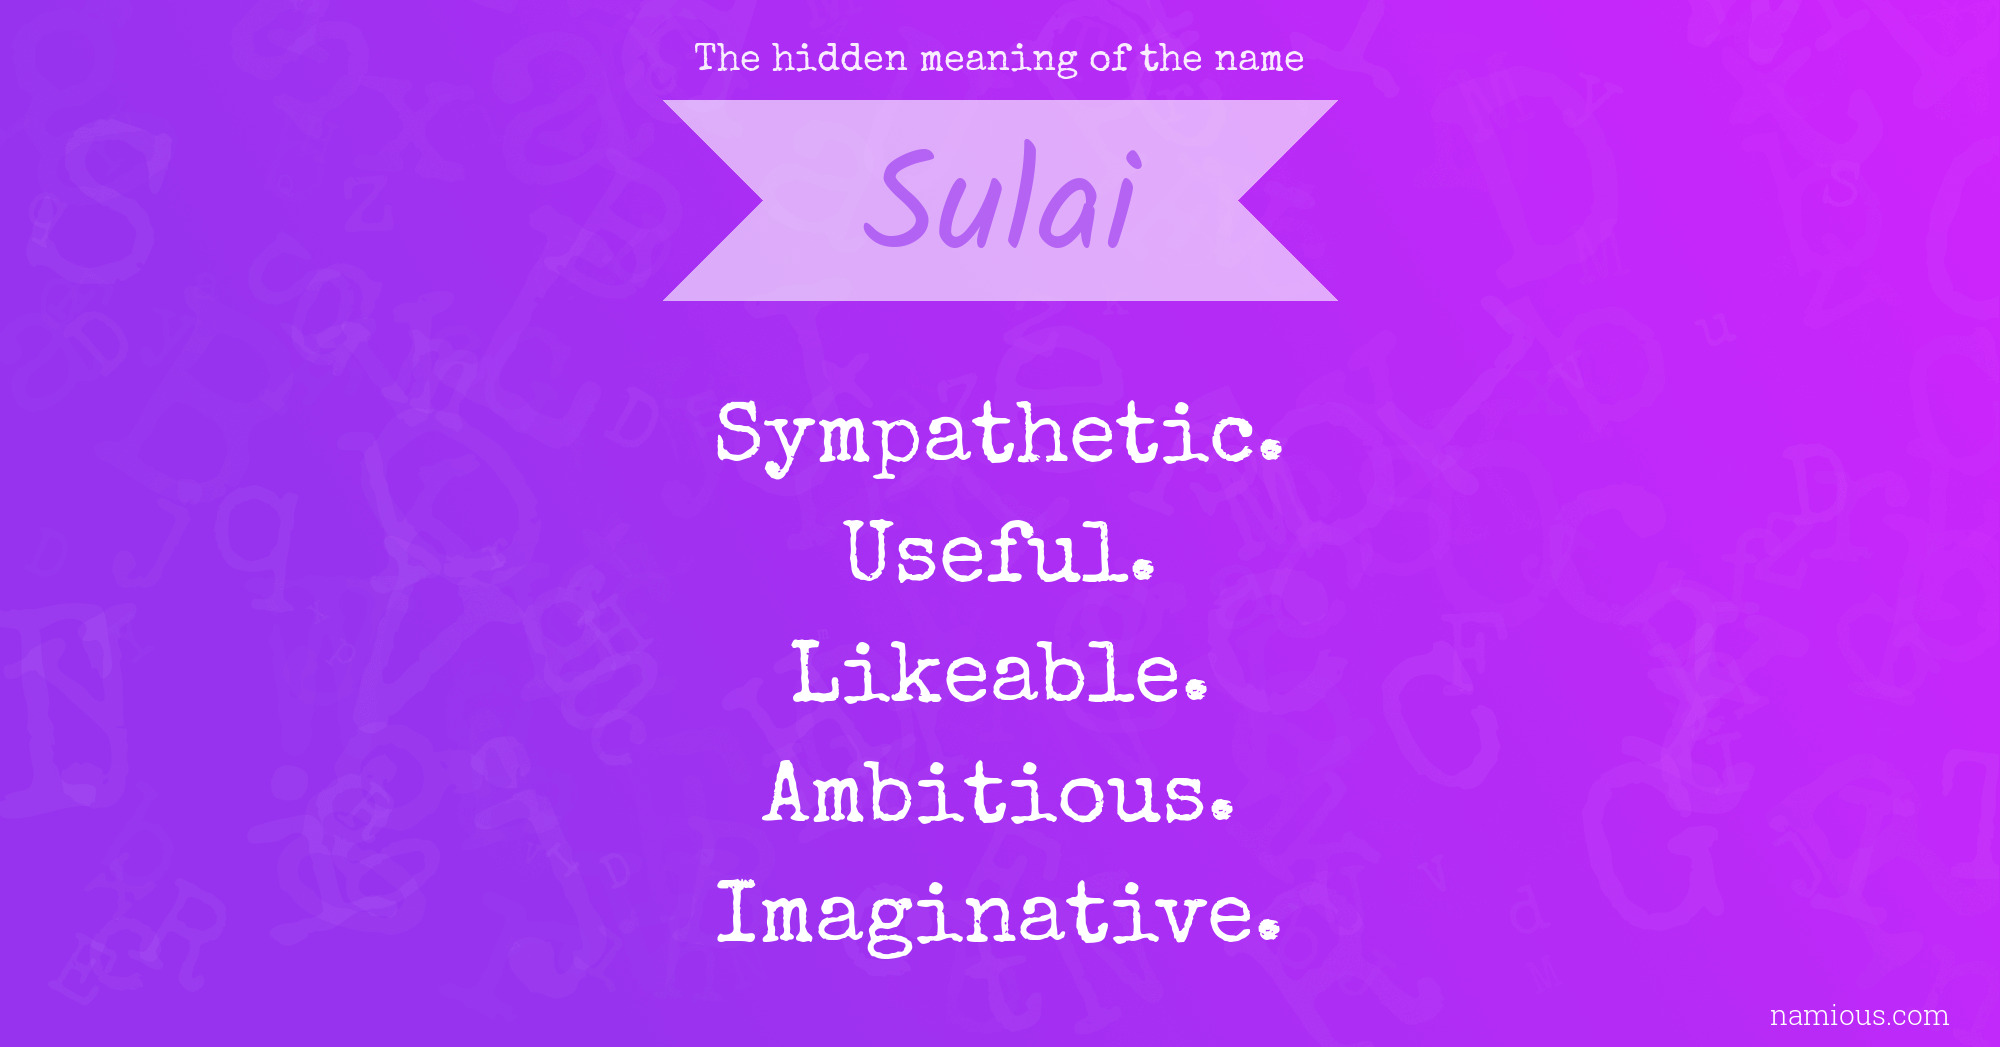 The hidden meaning of the name Sulai